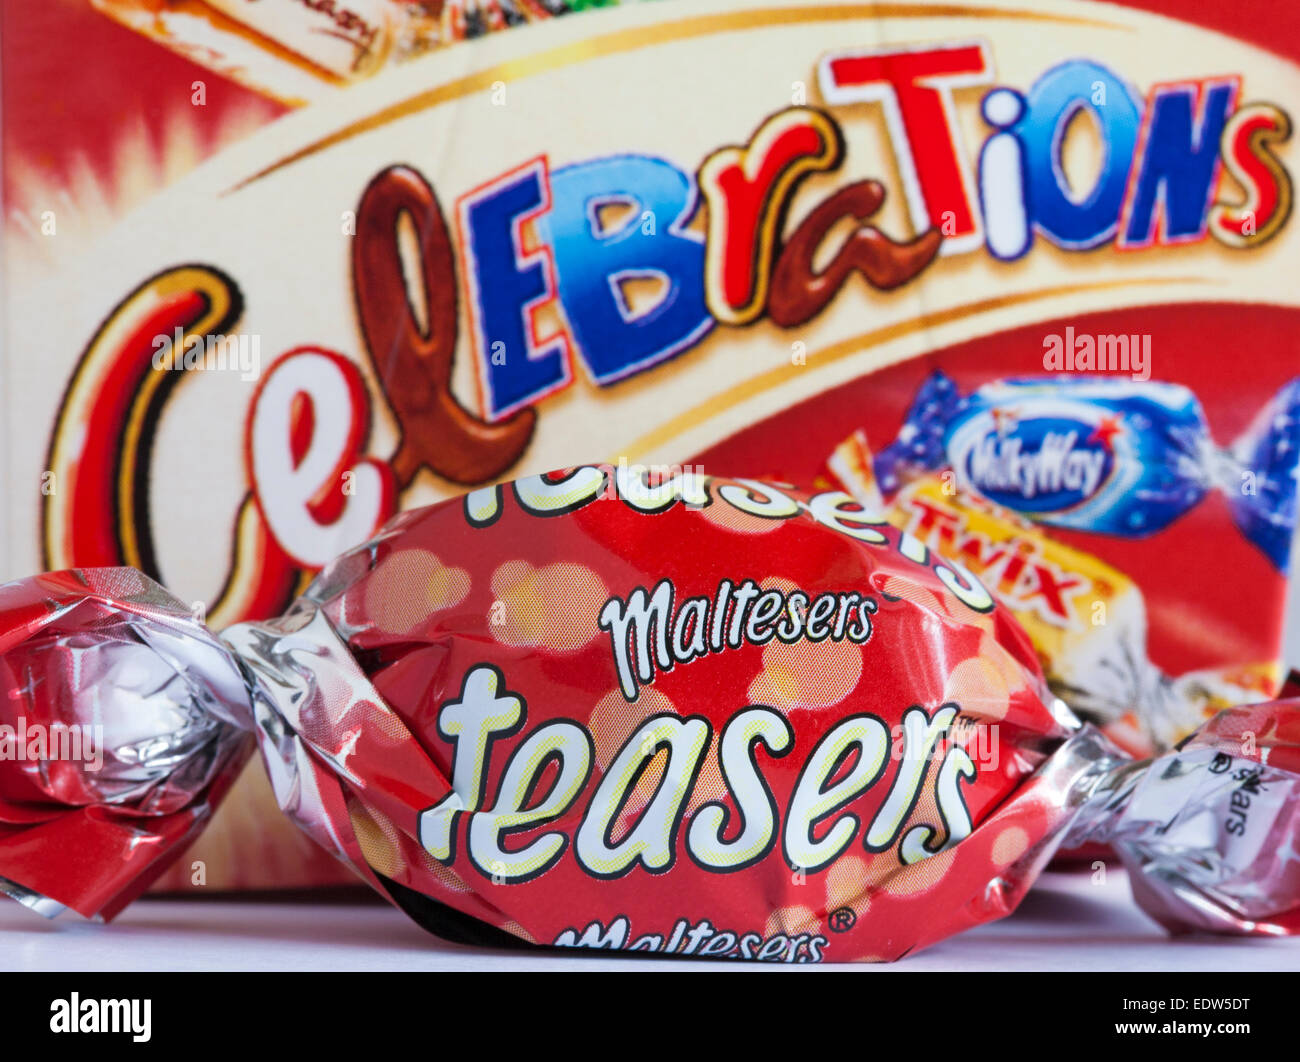 Maltesers teasers chocolate removed from box of Celebrations chocolates Stock Photo